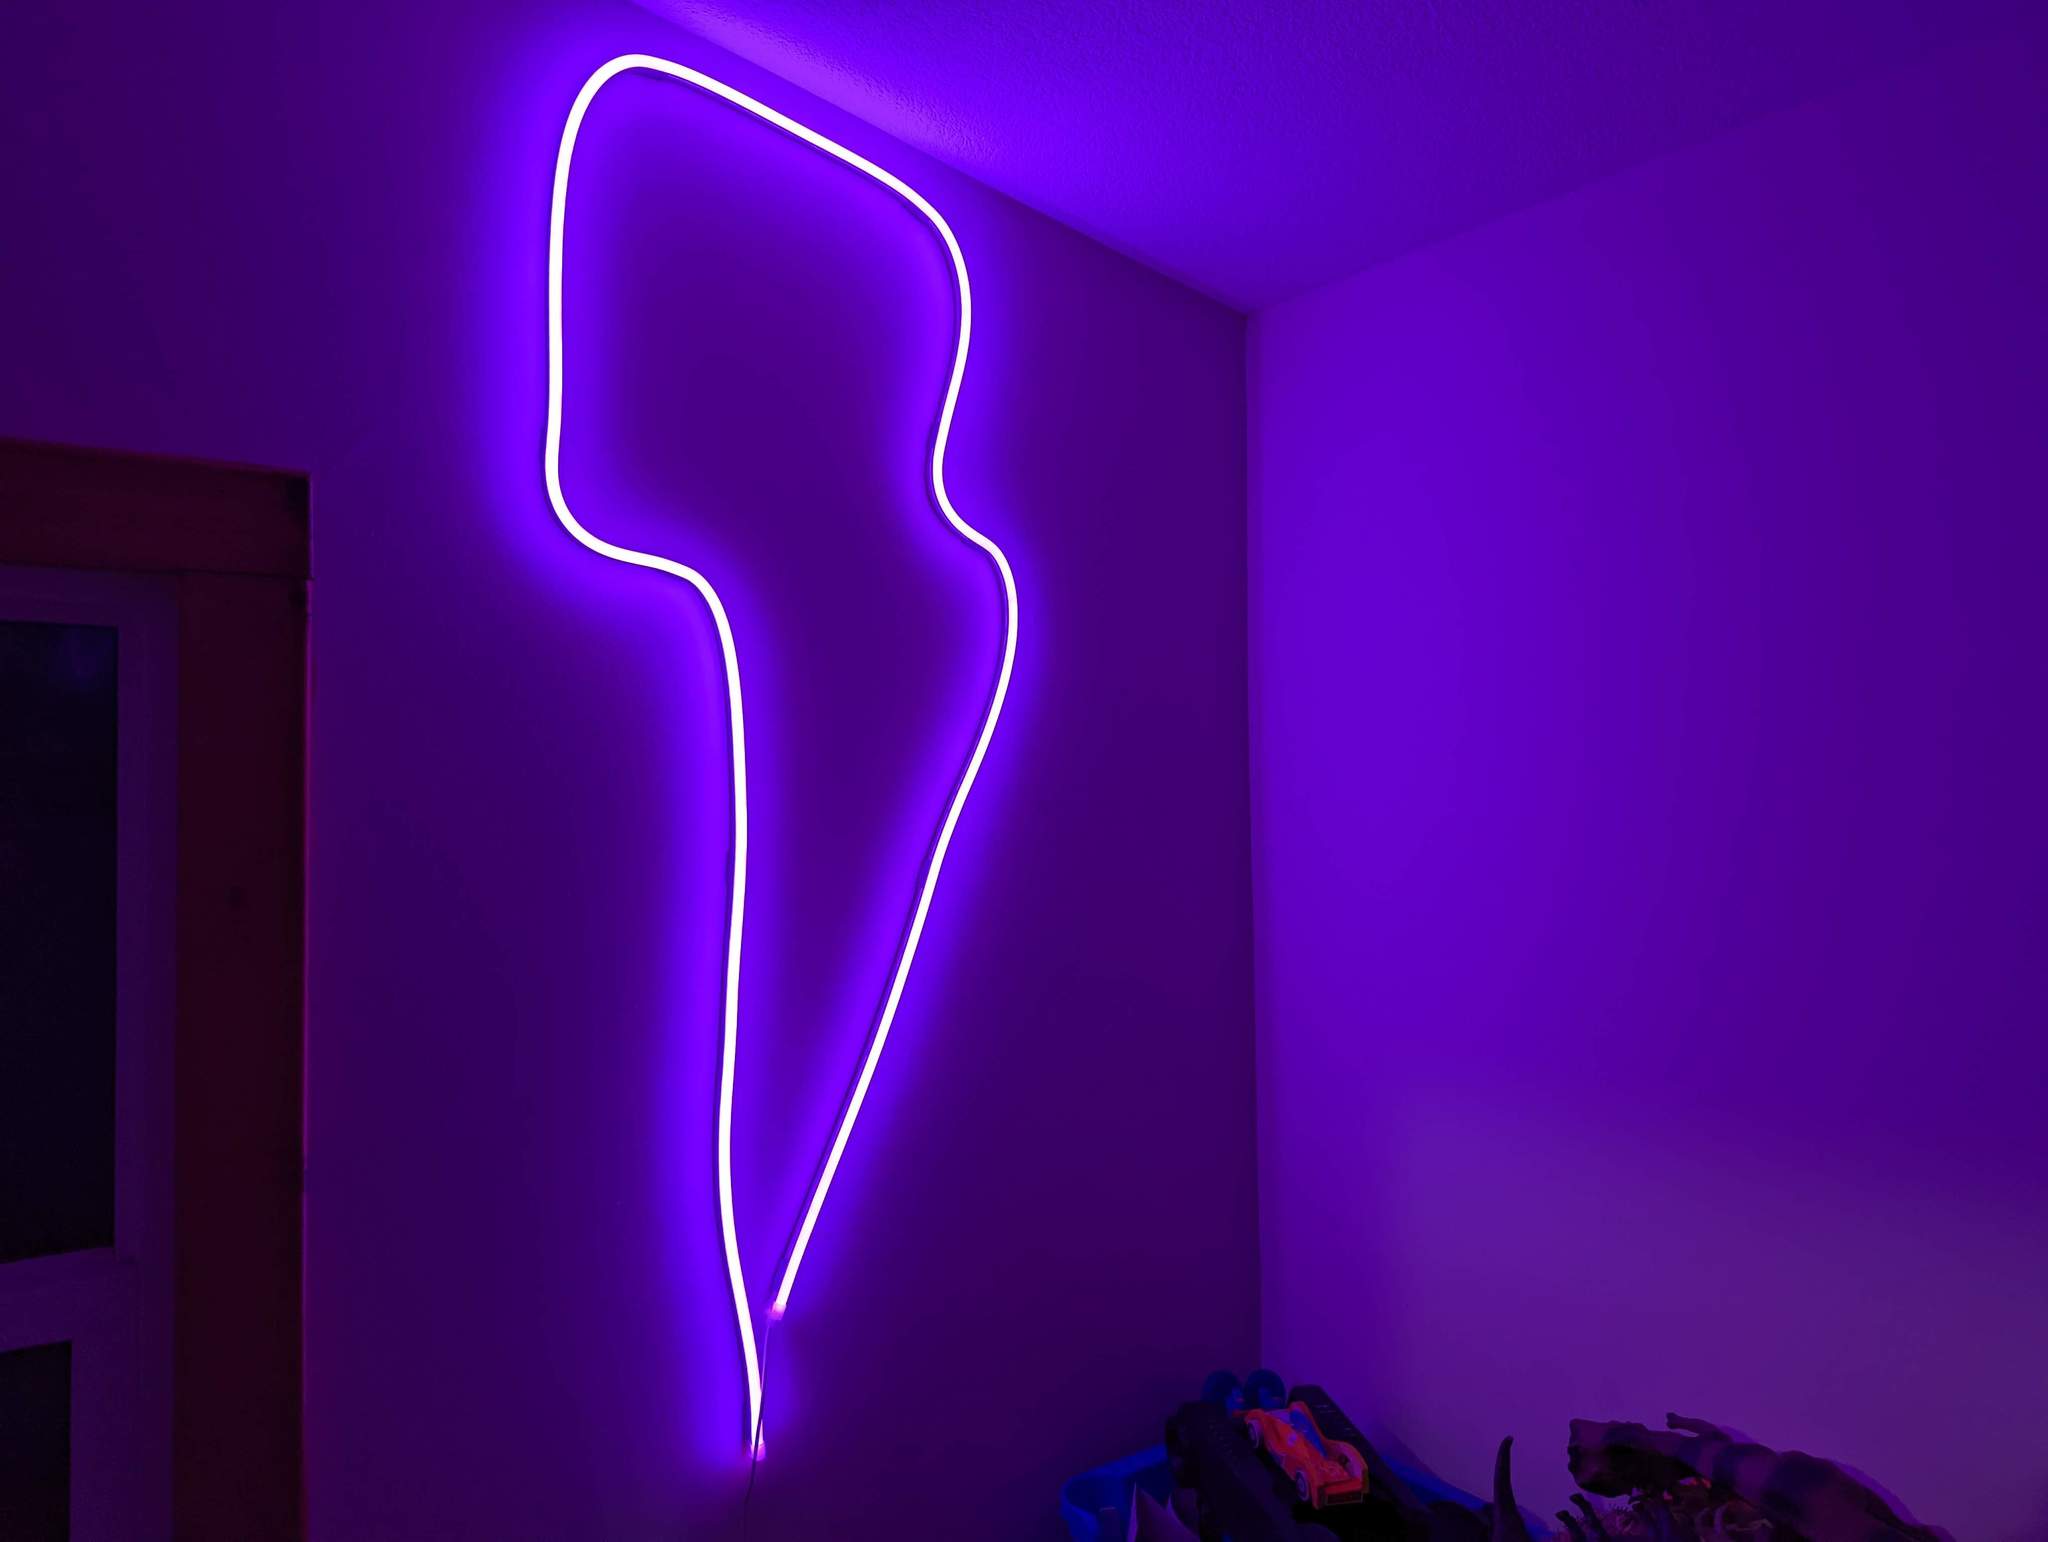 Govee Neon LED light strip review: Bringing retro neon lights into